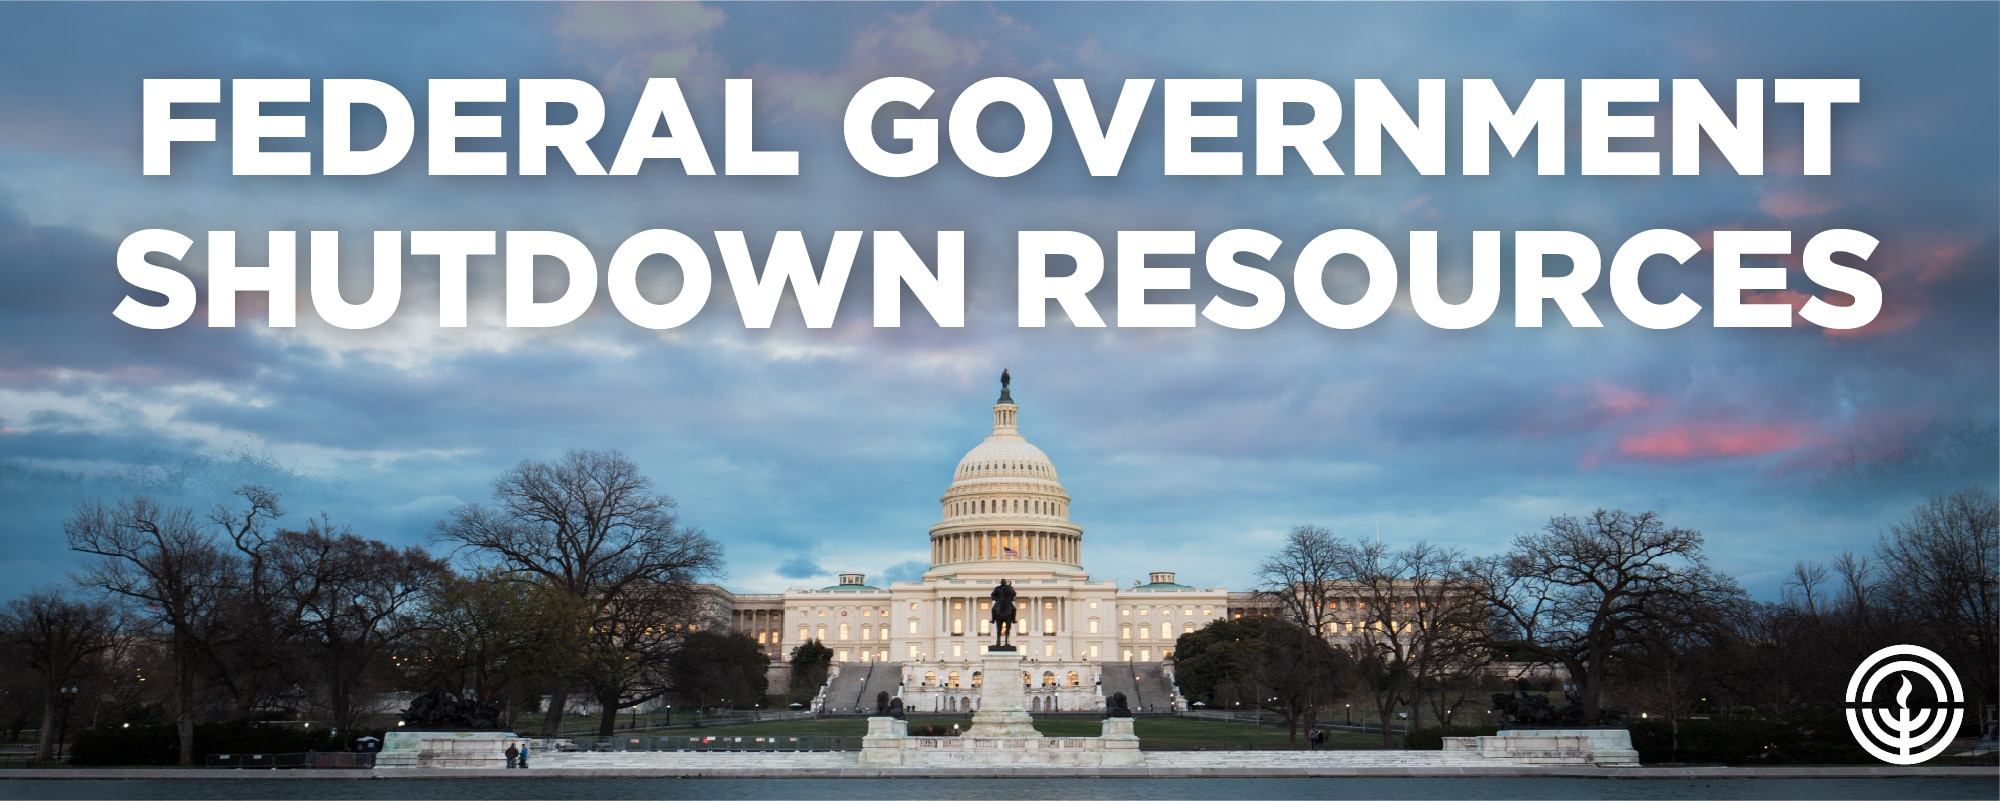 Federal Government Shutdown Resources: US Capitol